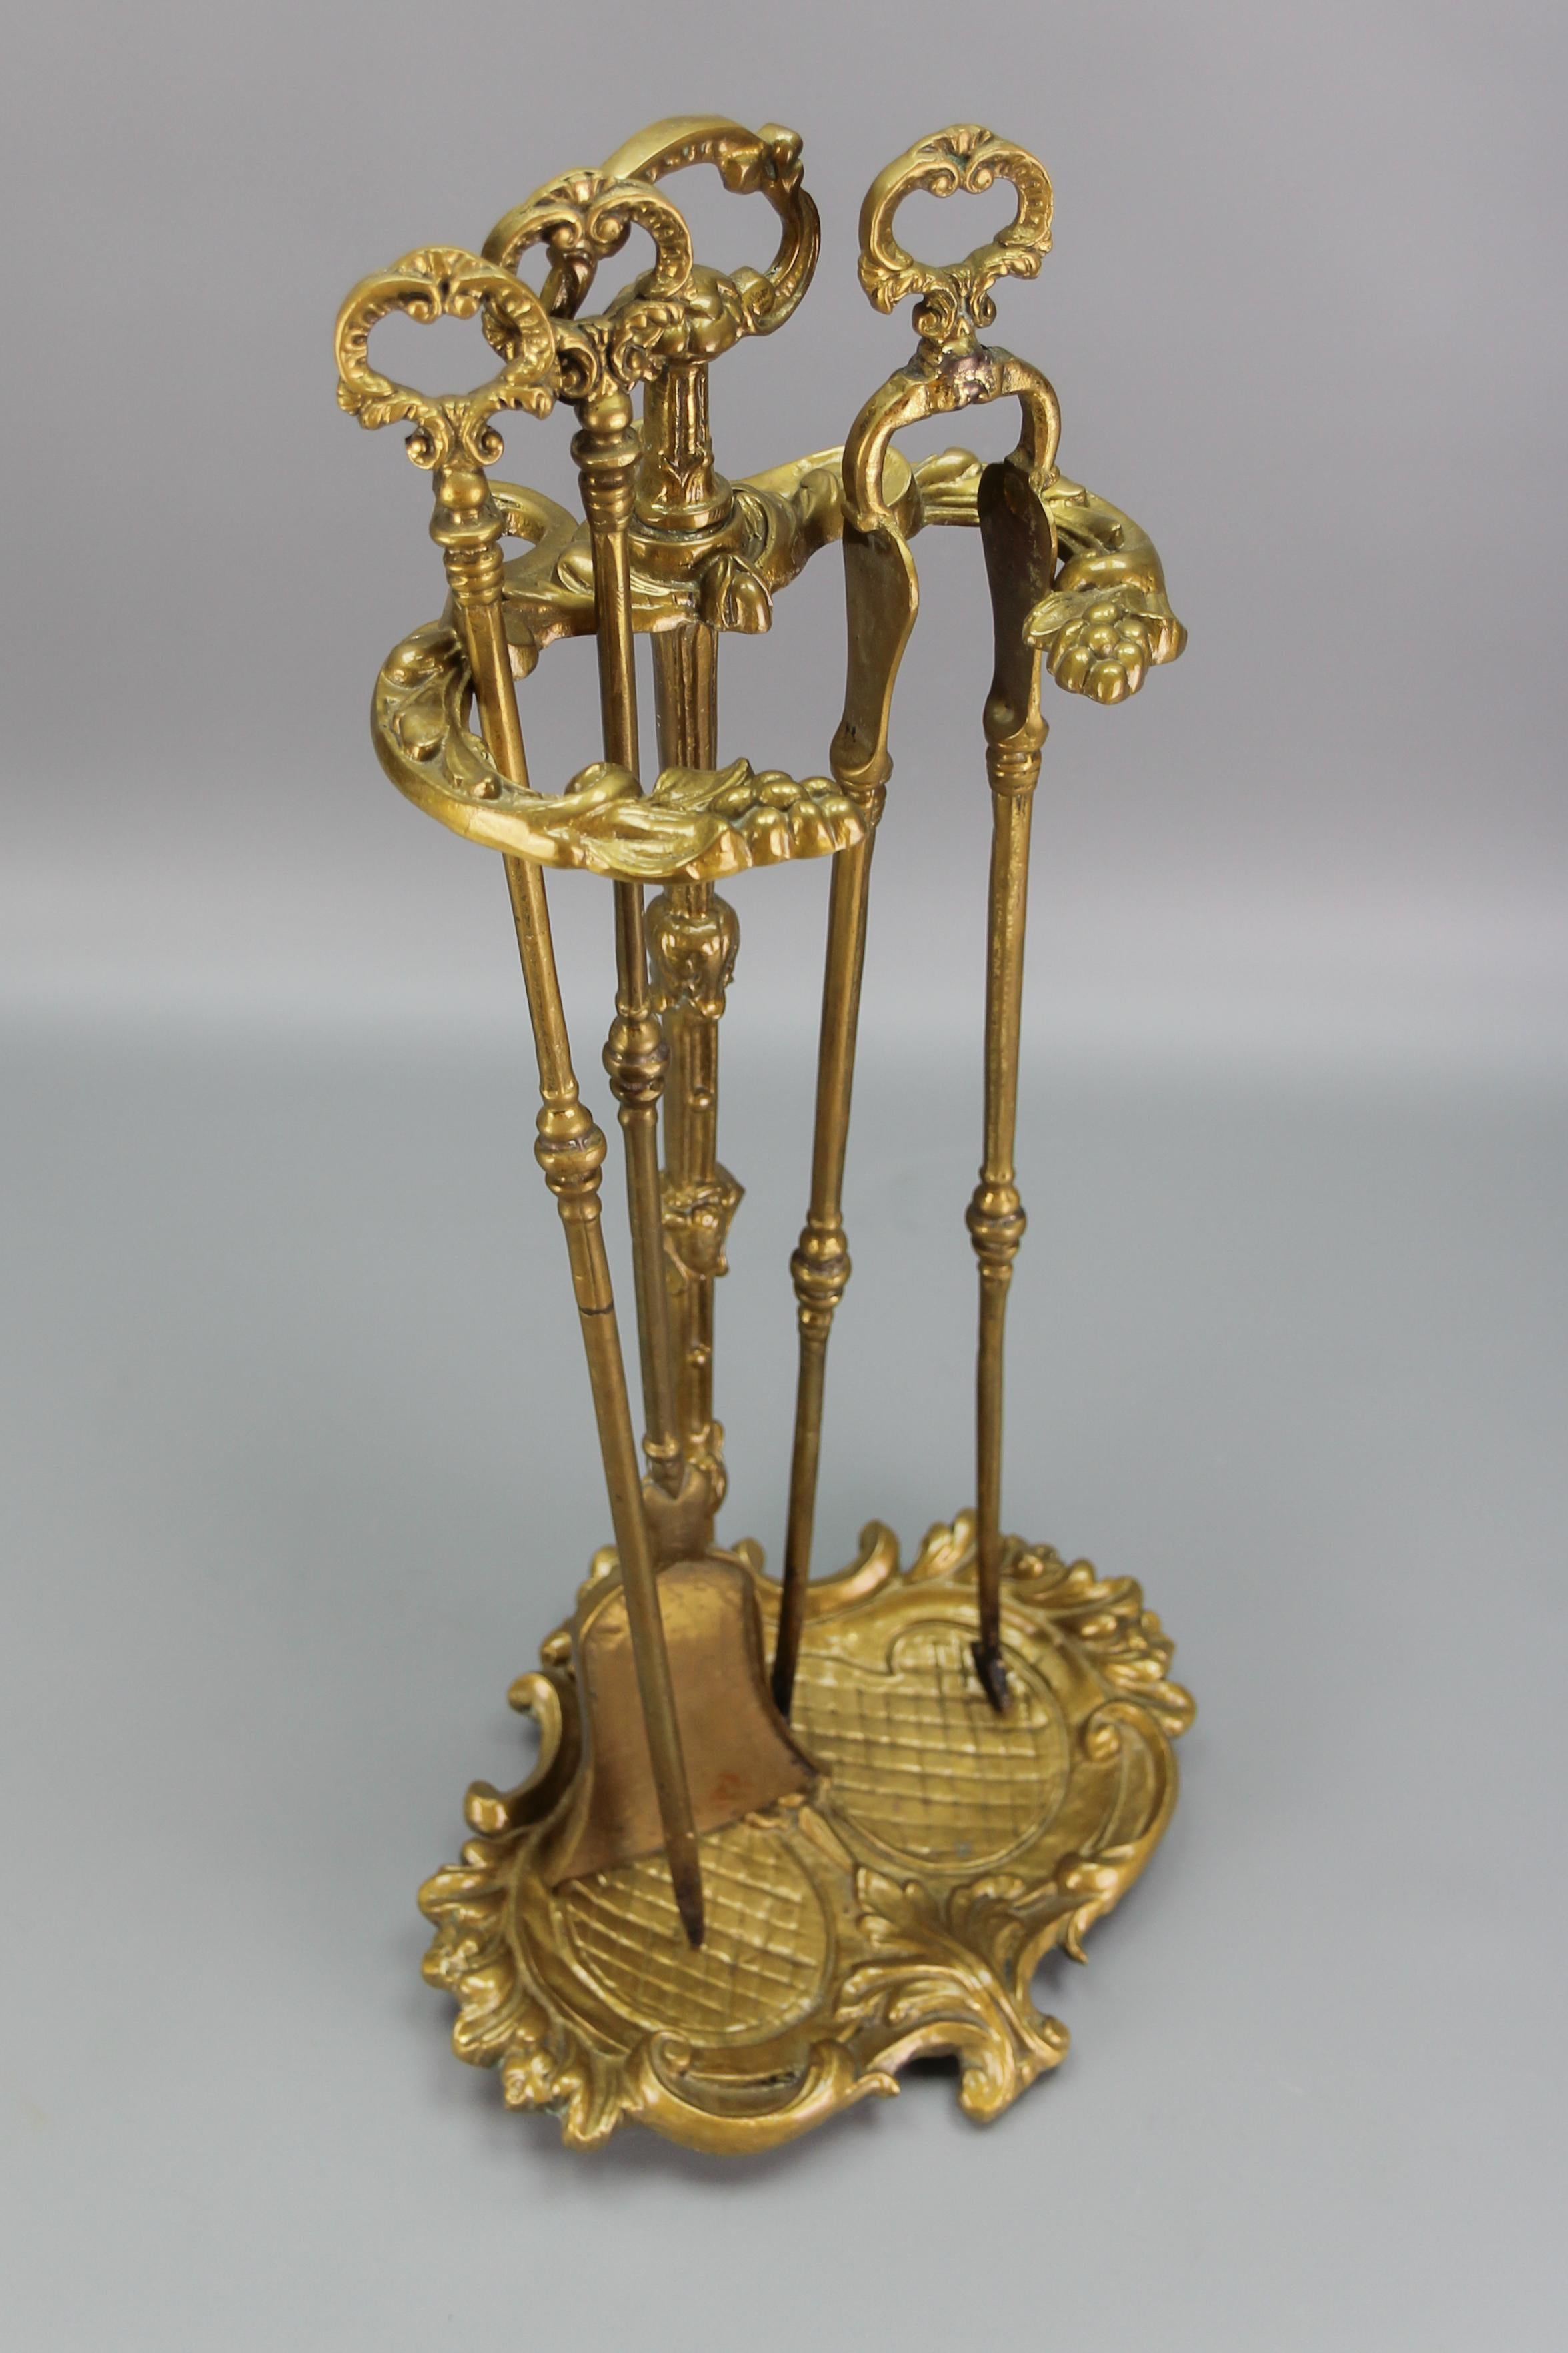 Neoclassical style fireplace tool set, made of bronze and brass, France, circa the 1950s.
A beautiful set of fireplace tools and their Stand made of bronze and brass. The base of the Stand is ornate with acanthus leaves and scrolls, and the